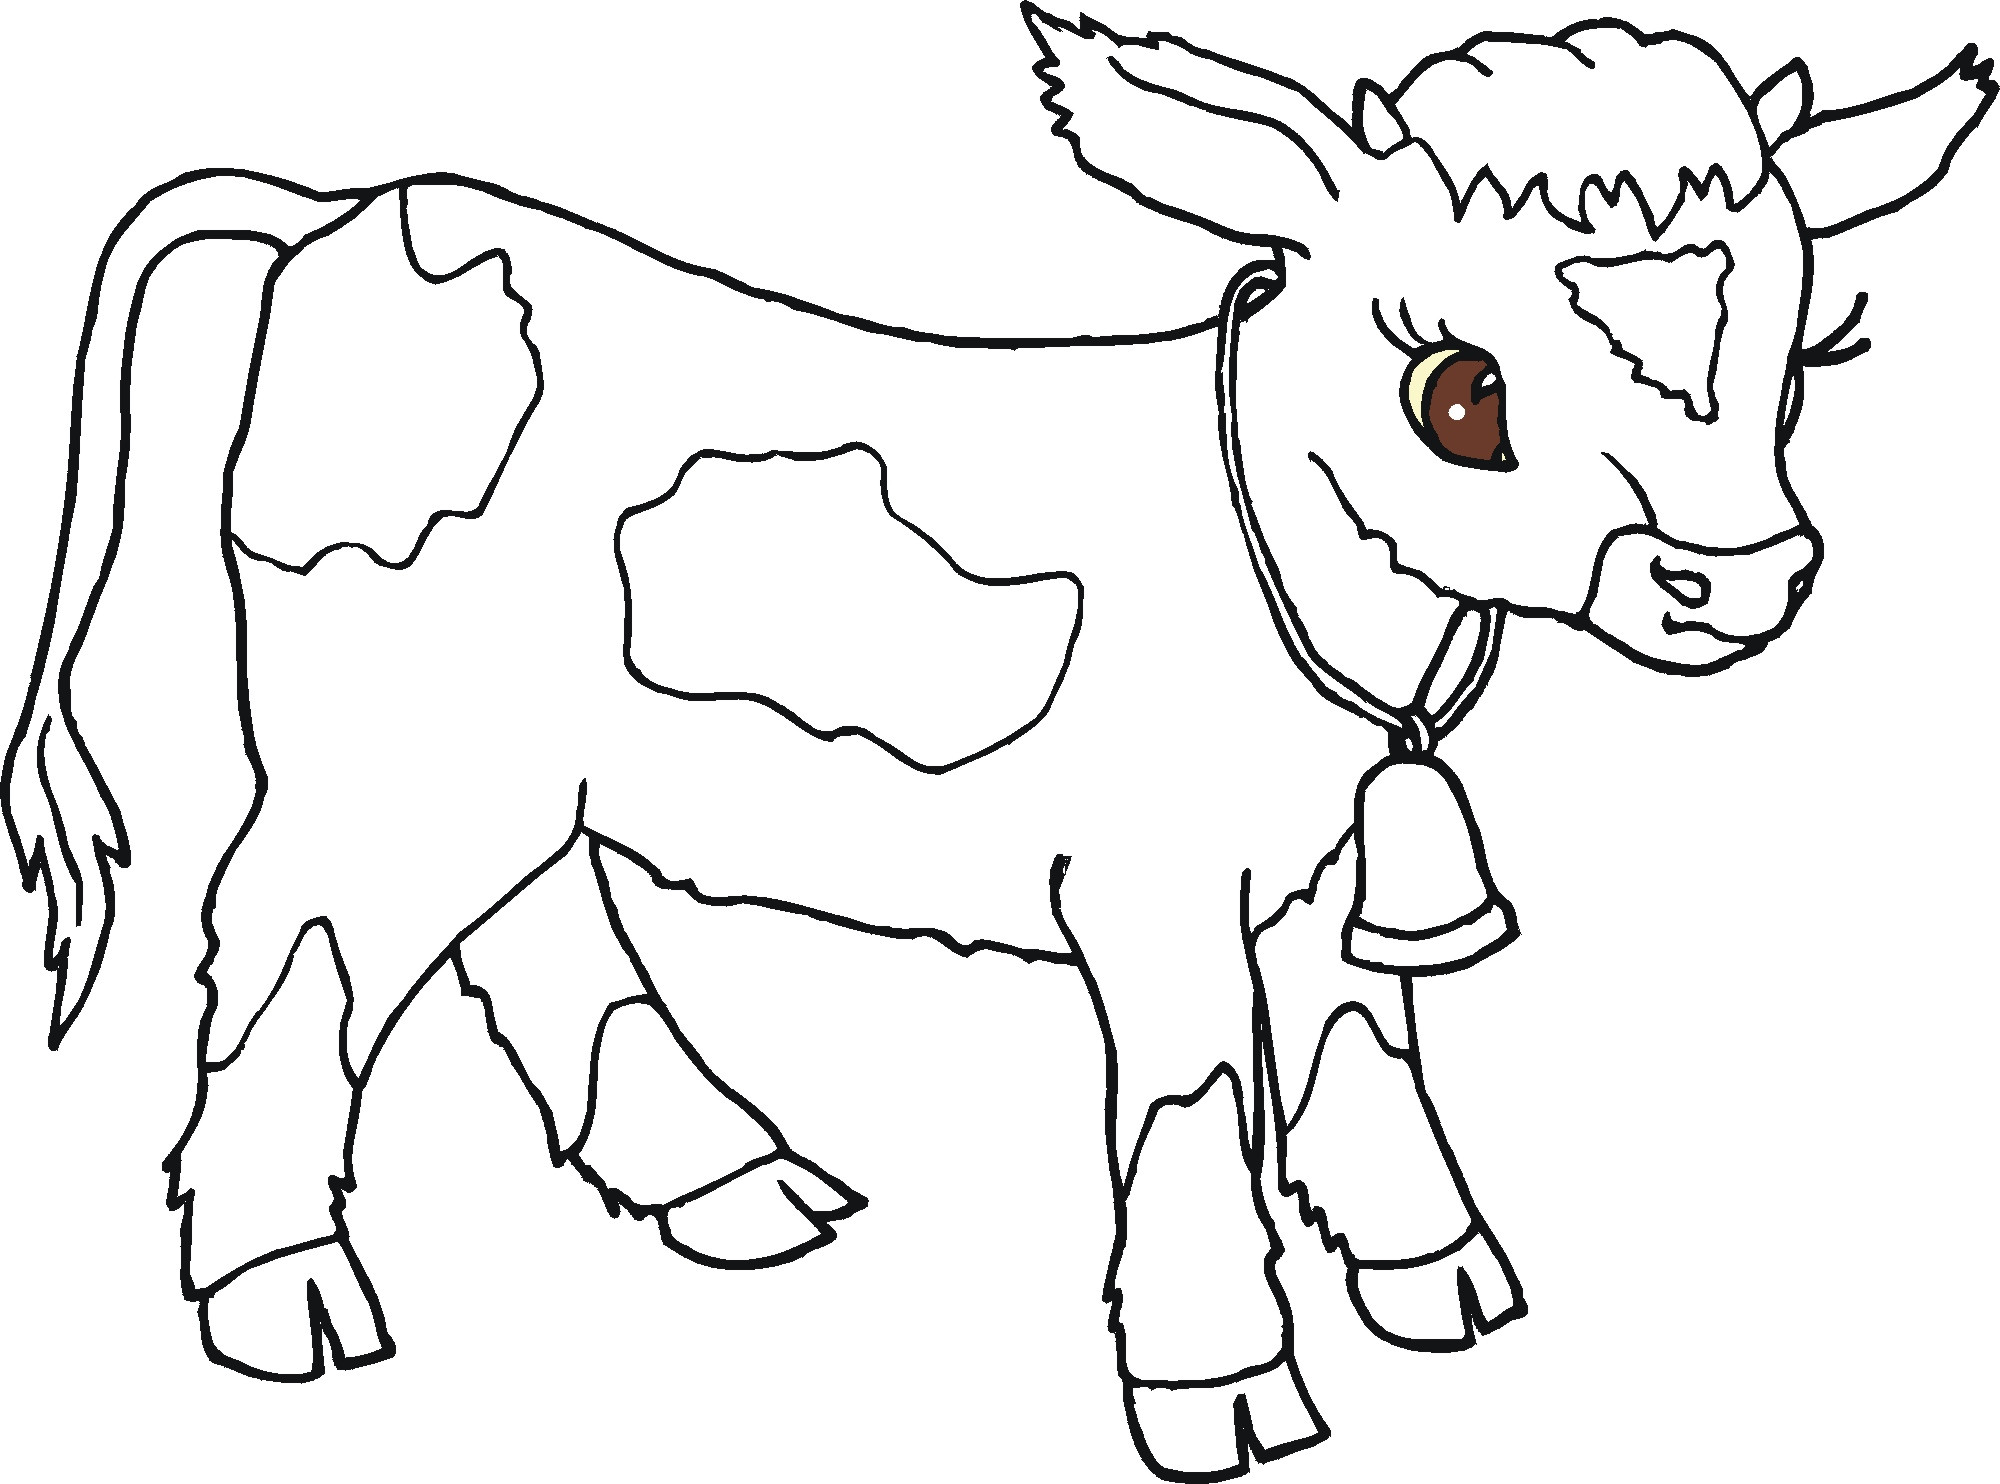 Animal Coloring Pages For Kids
 Animal Coloring Pages – Children s Best Activities